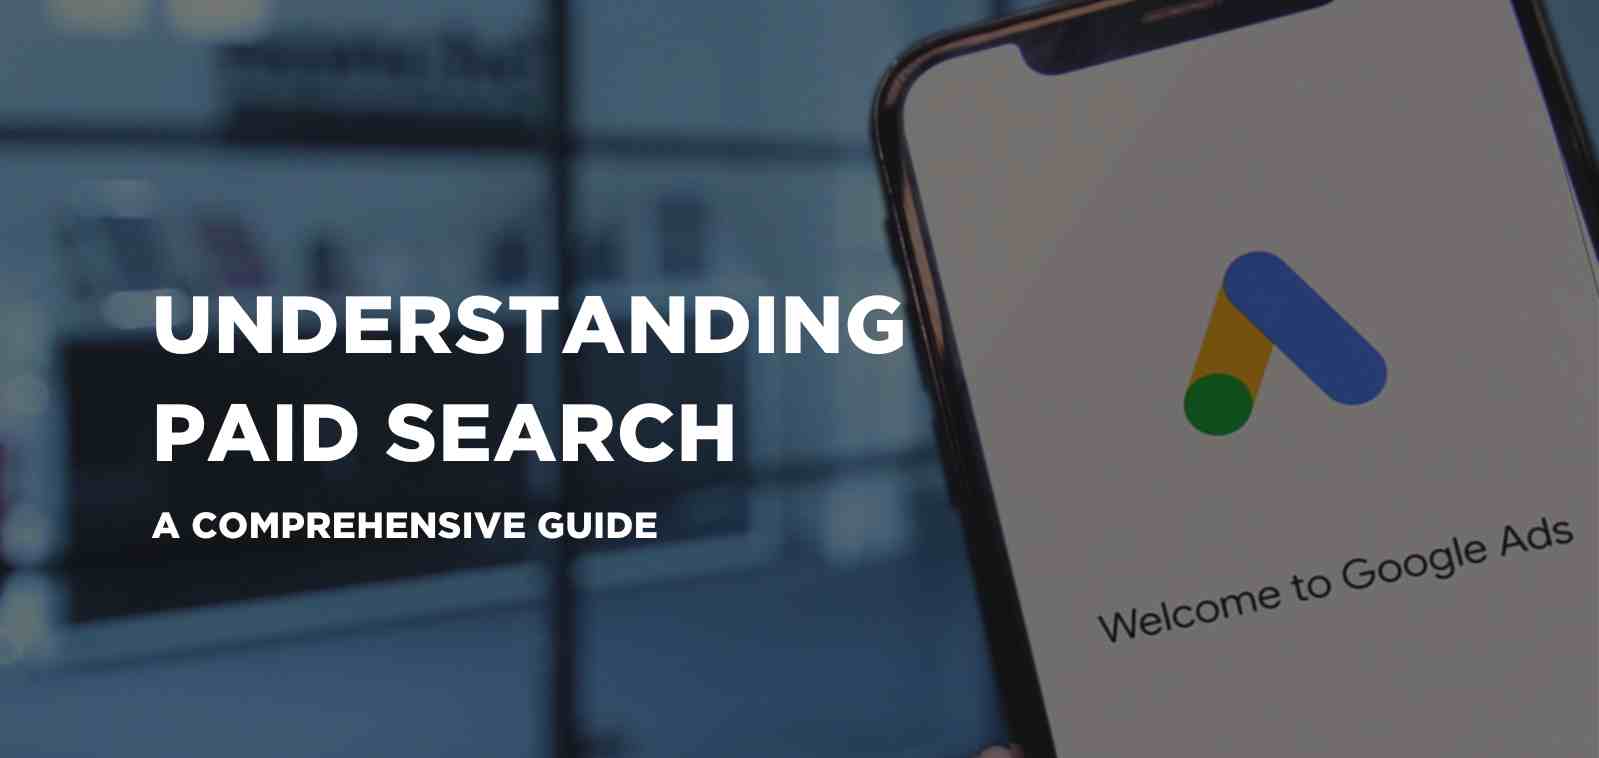 Understanding paid search